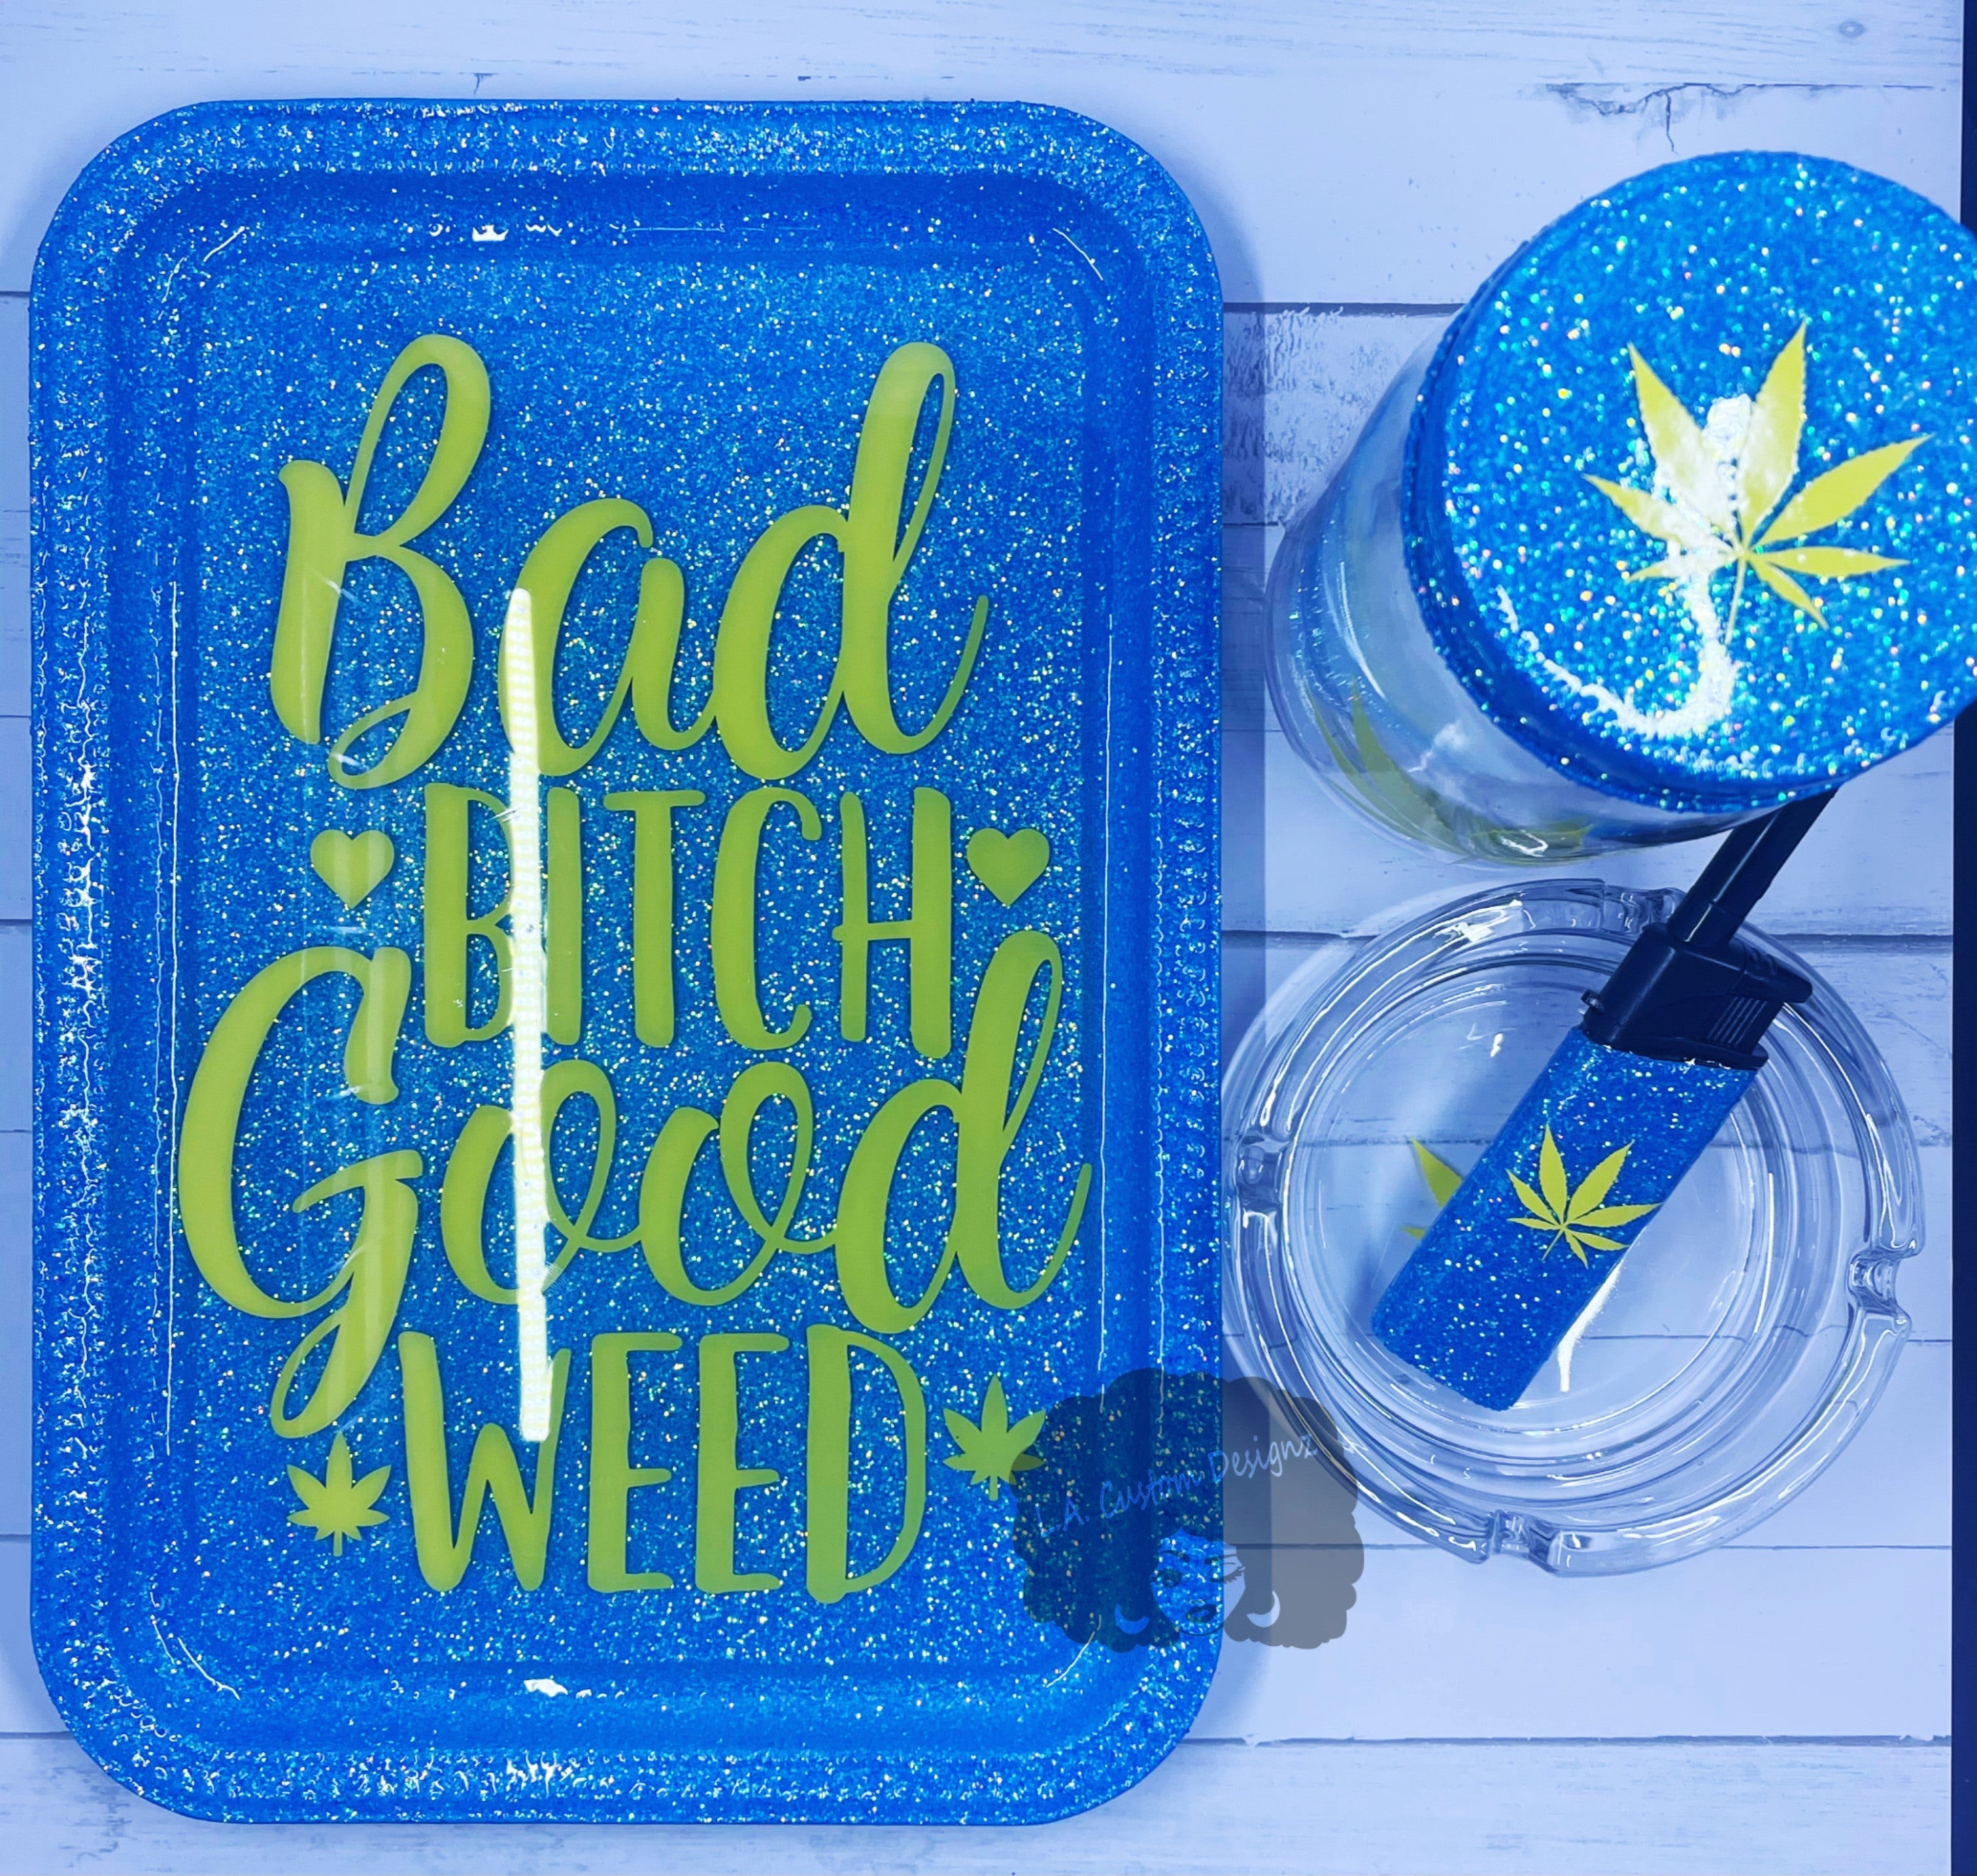 Roll That Shit! Rolling Tray Set